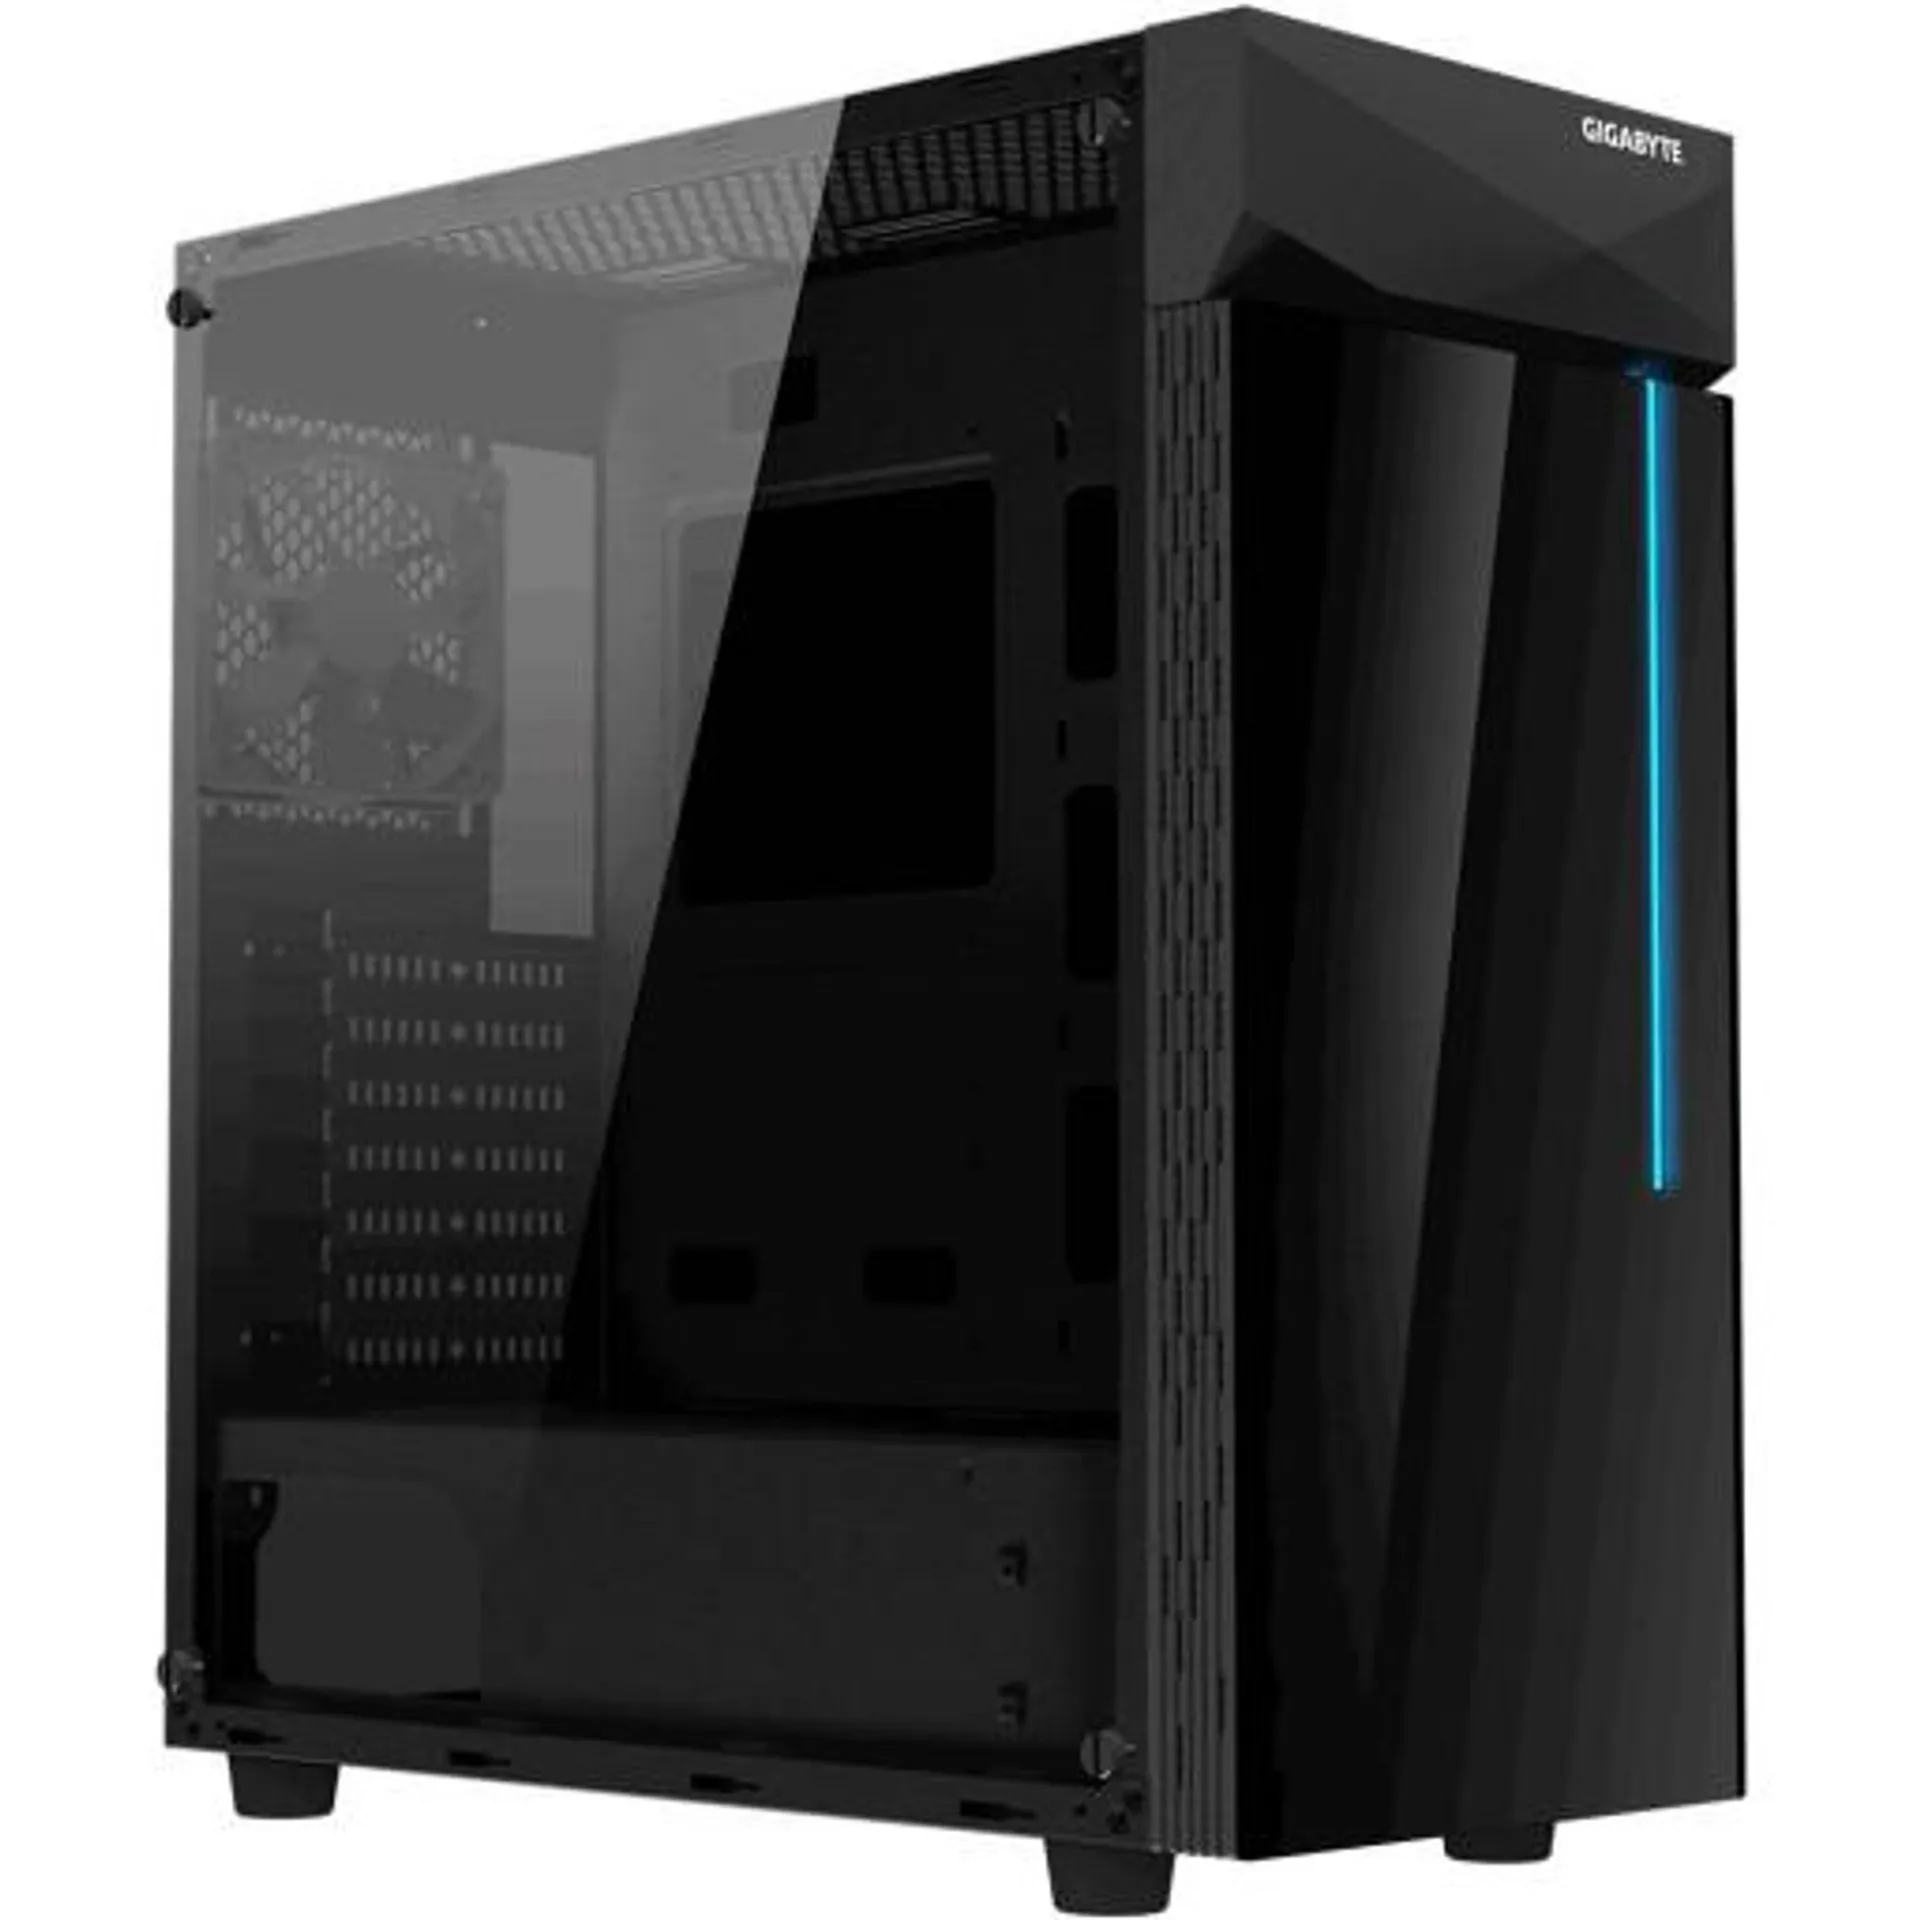 GIGABYTE C200 TEMPERED GLASS ATX CHASSIS